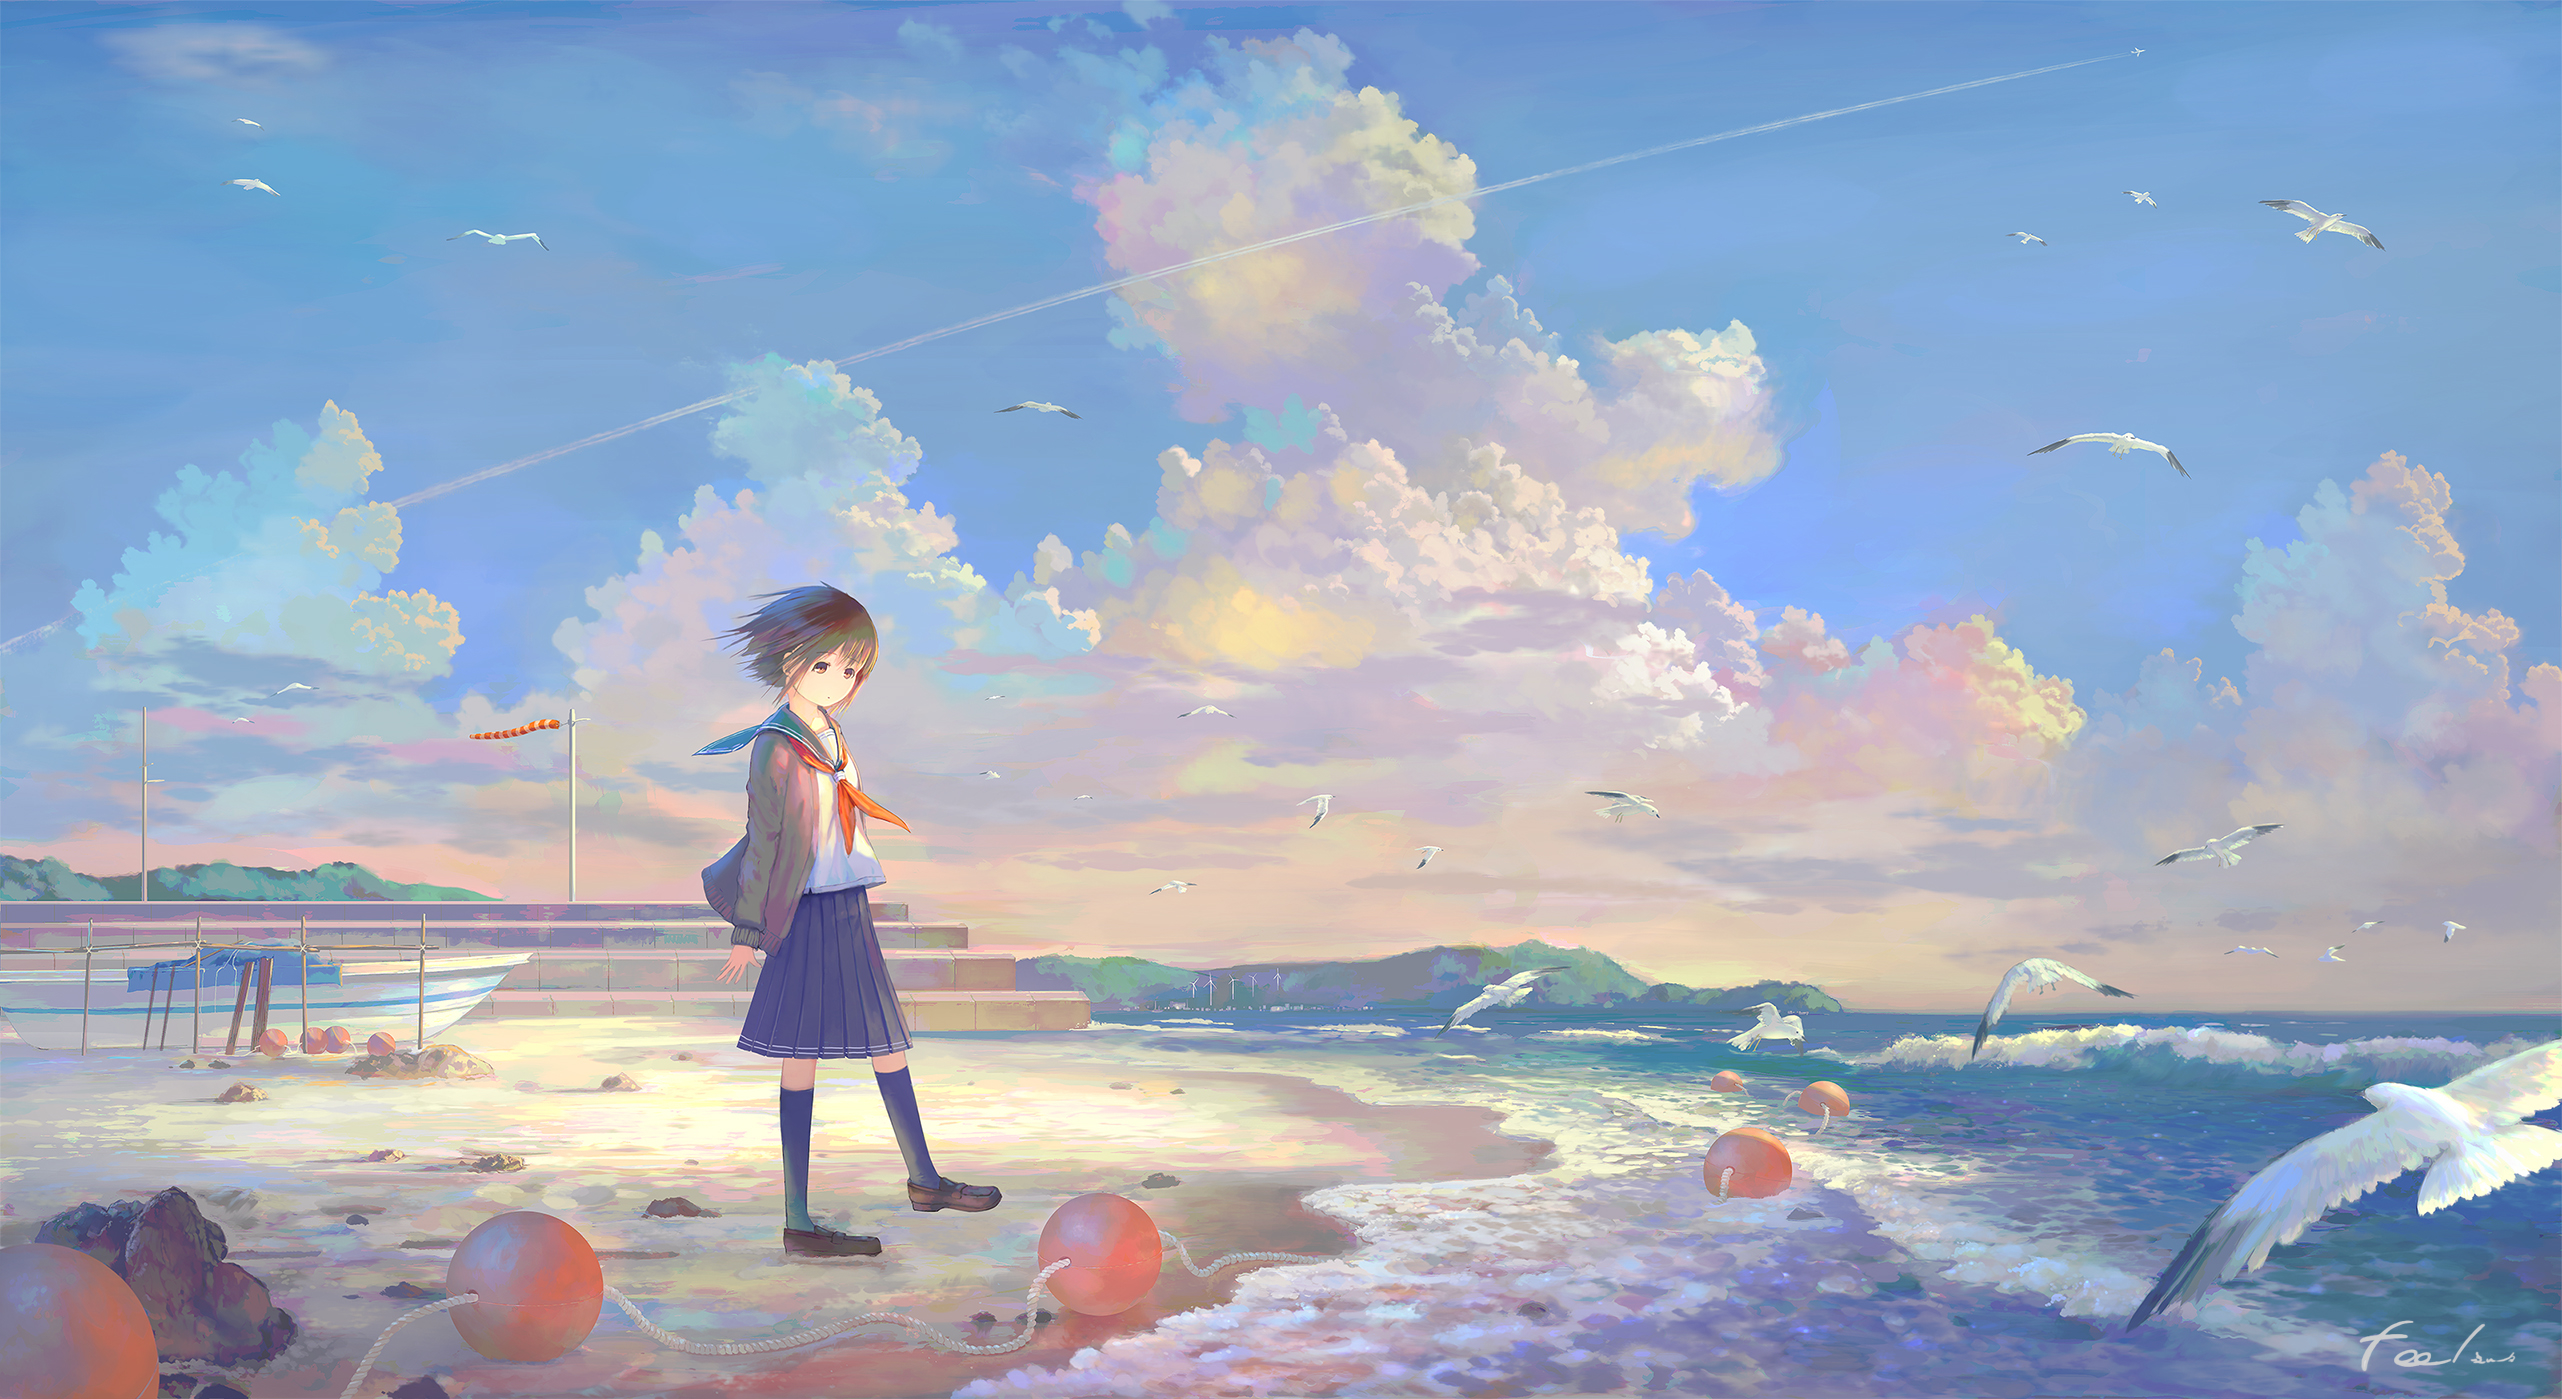 Anime Girl at the Seaside Wallpaper, HD Anime 4K Wallpapers, Images